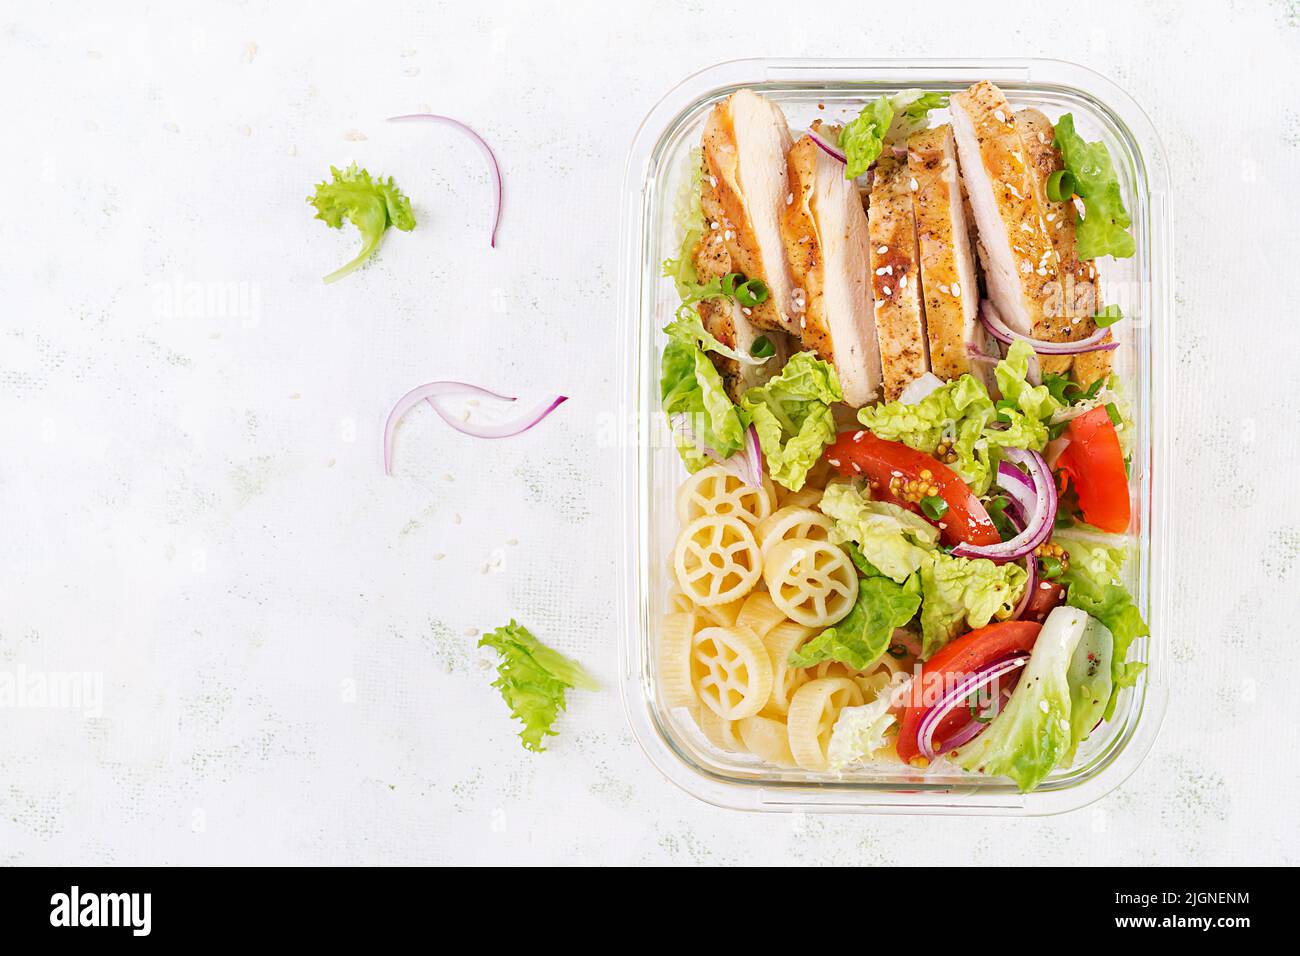 Lunchbox. Lunch box with grilled chicken fillet and pasta salad with fresh vegetables. Top view, overhead Stock Photo